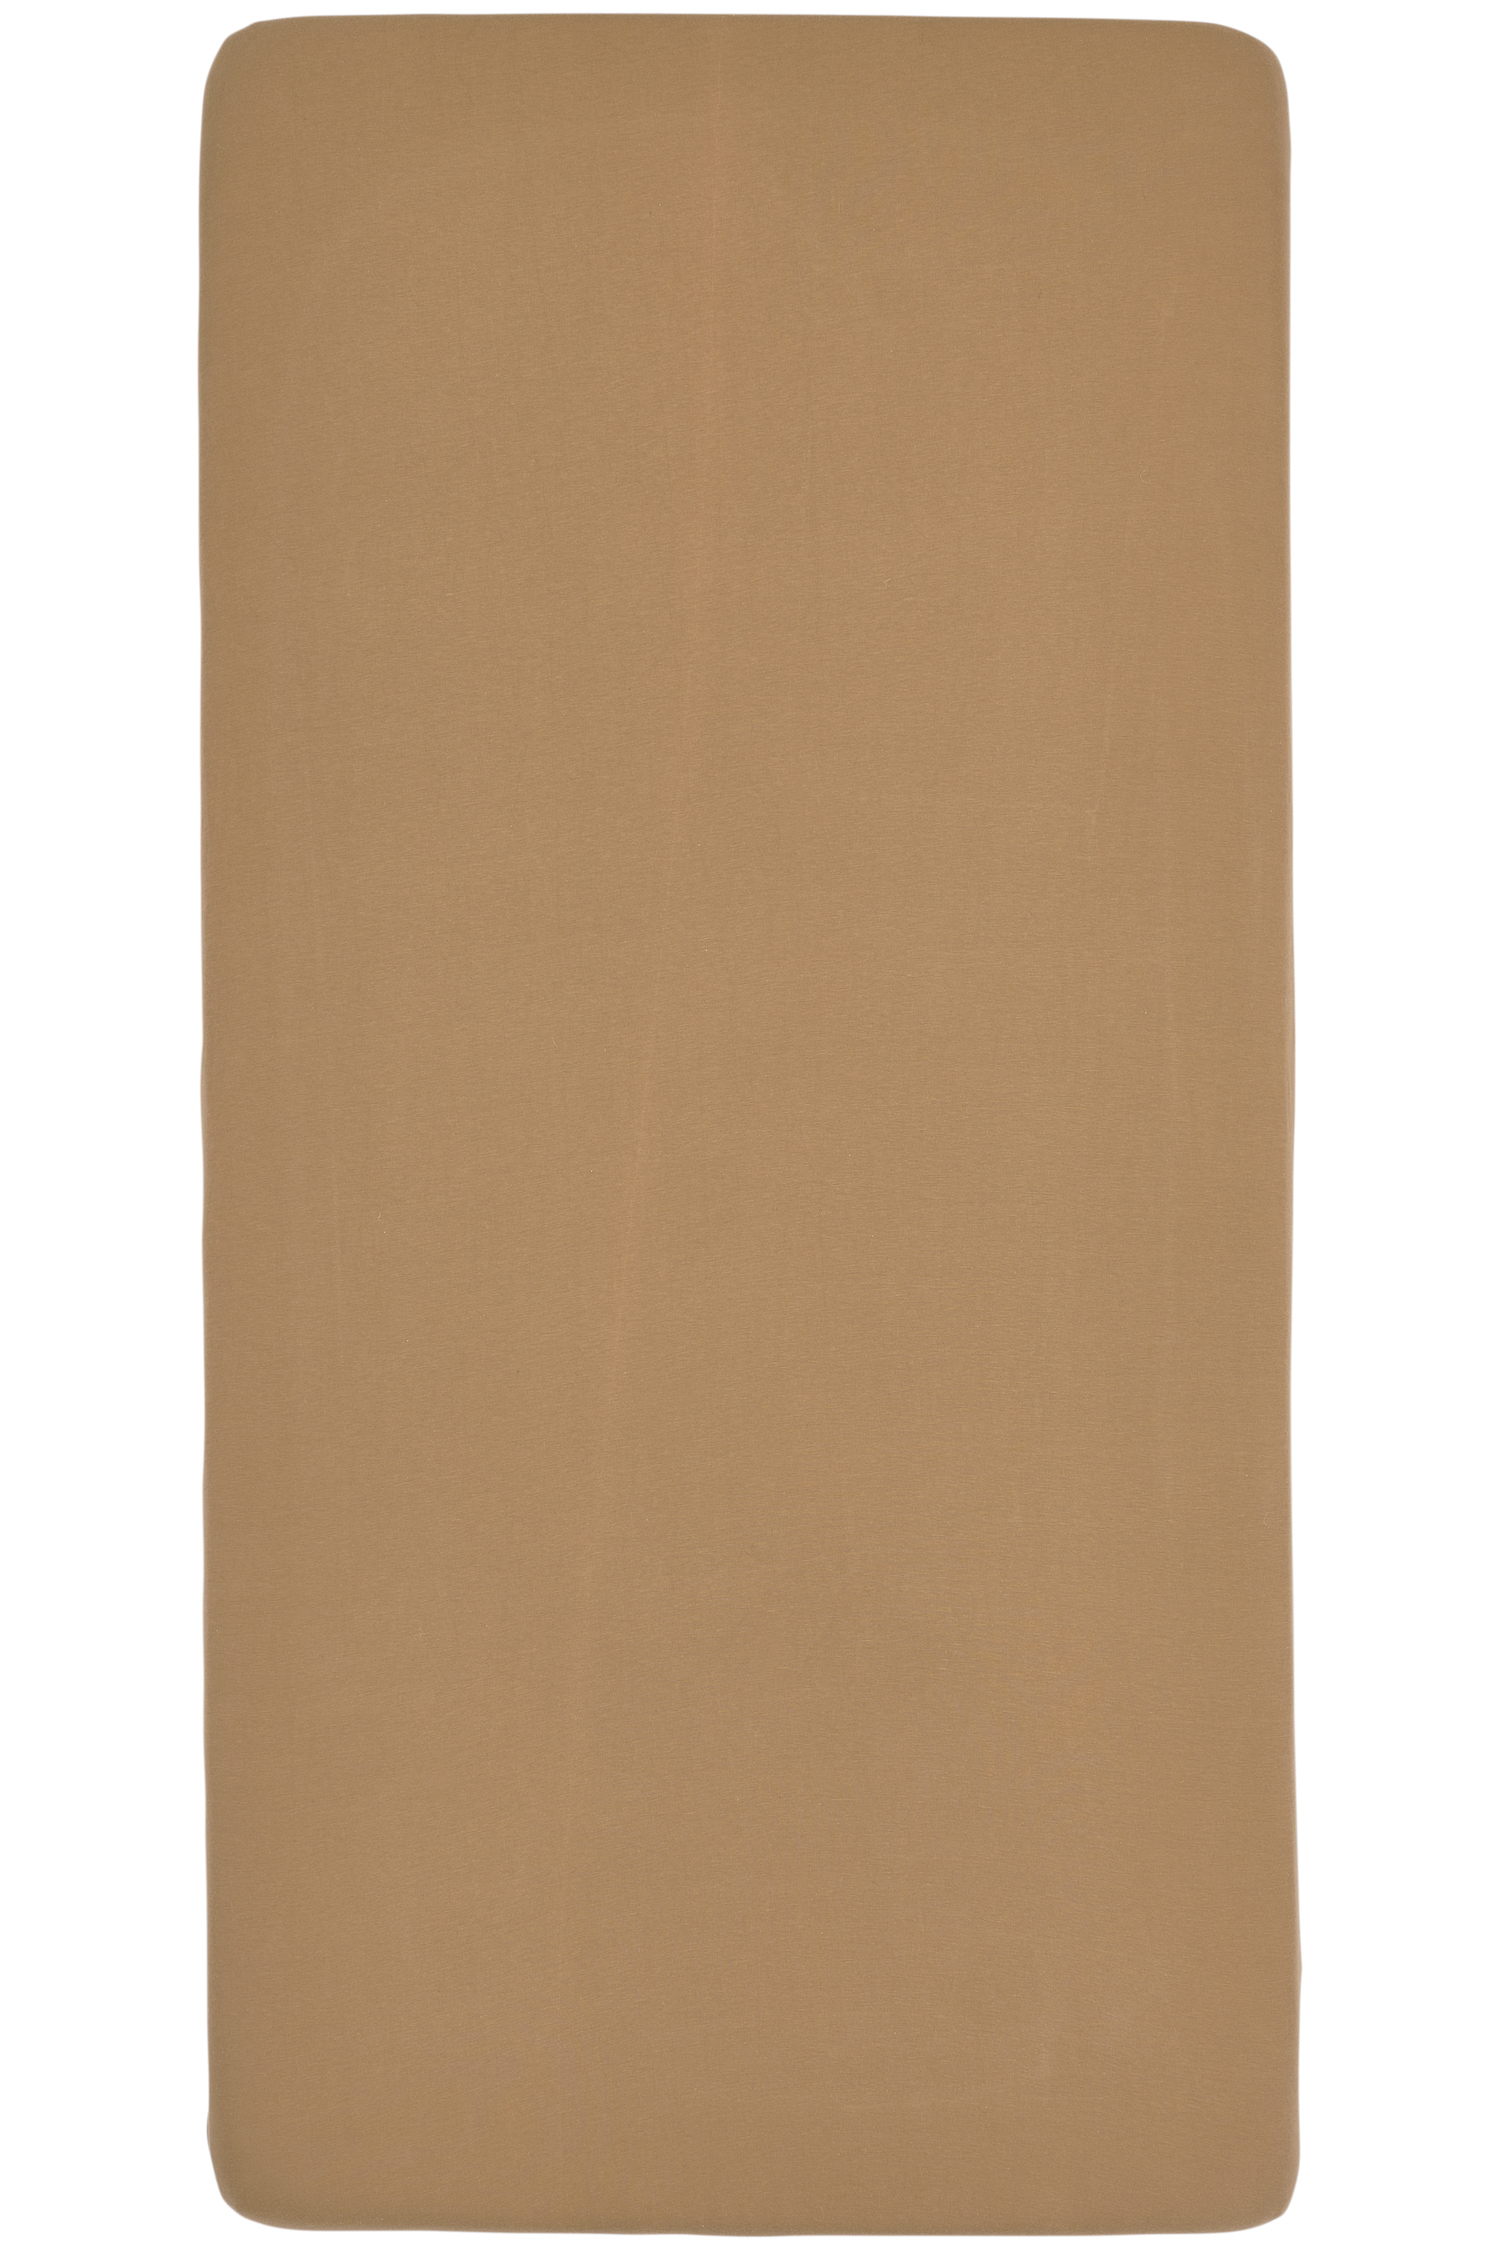 Fitted sheet 1-Pers. Uni - toffee - 80x200cm